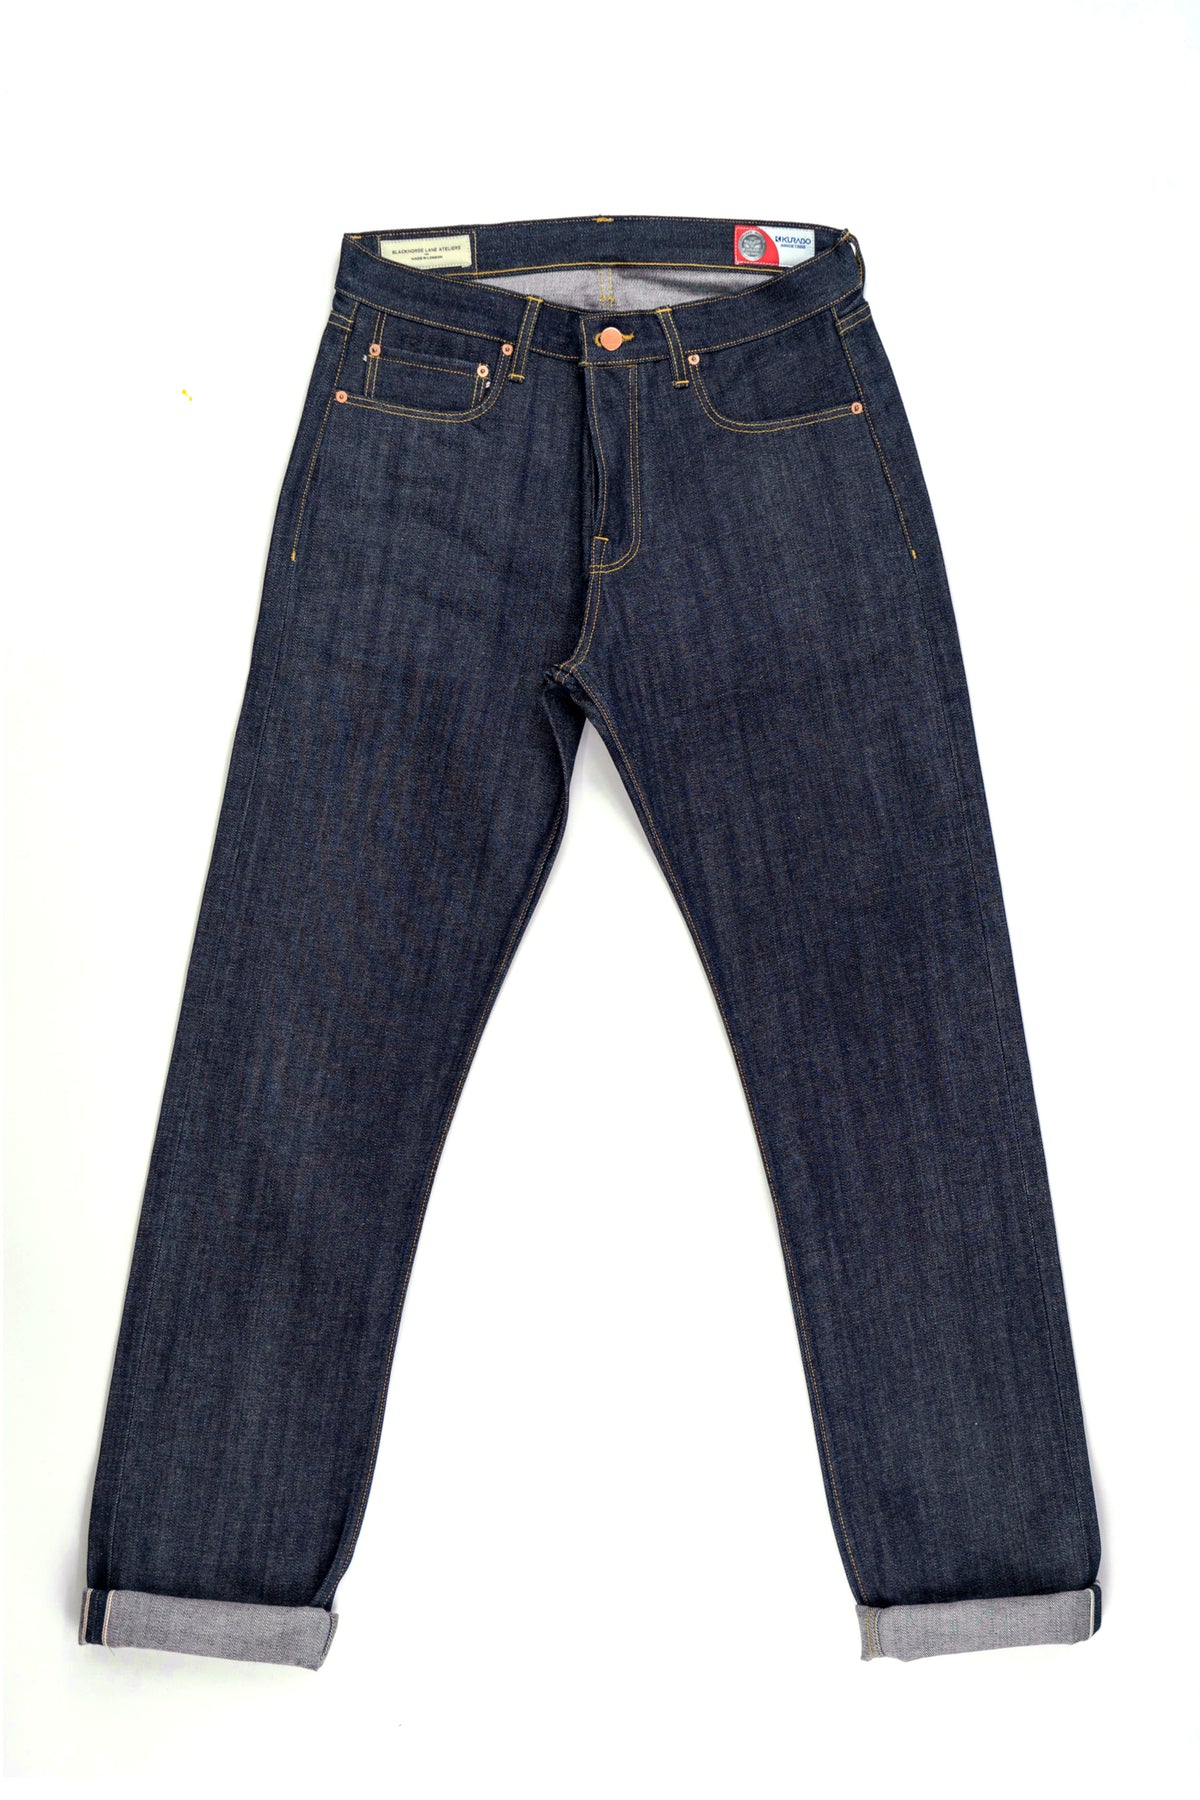 NW1 Relaxed Heritage Indigo 14oz Japanese Raw Selvedge Mens Jeans